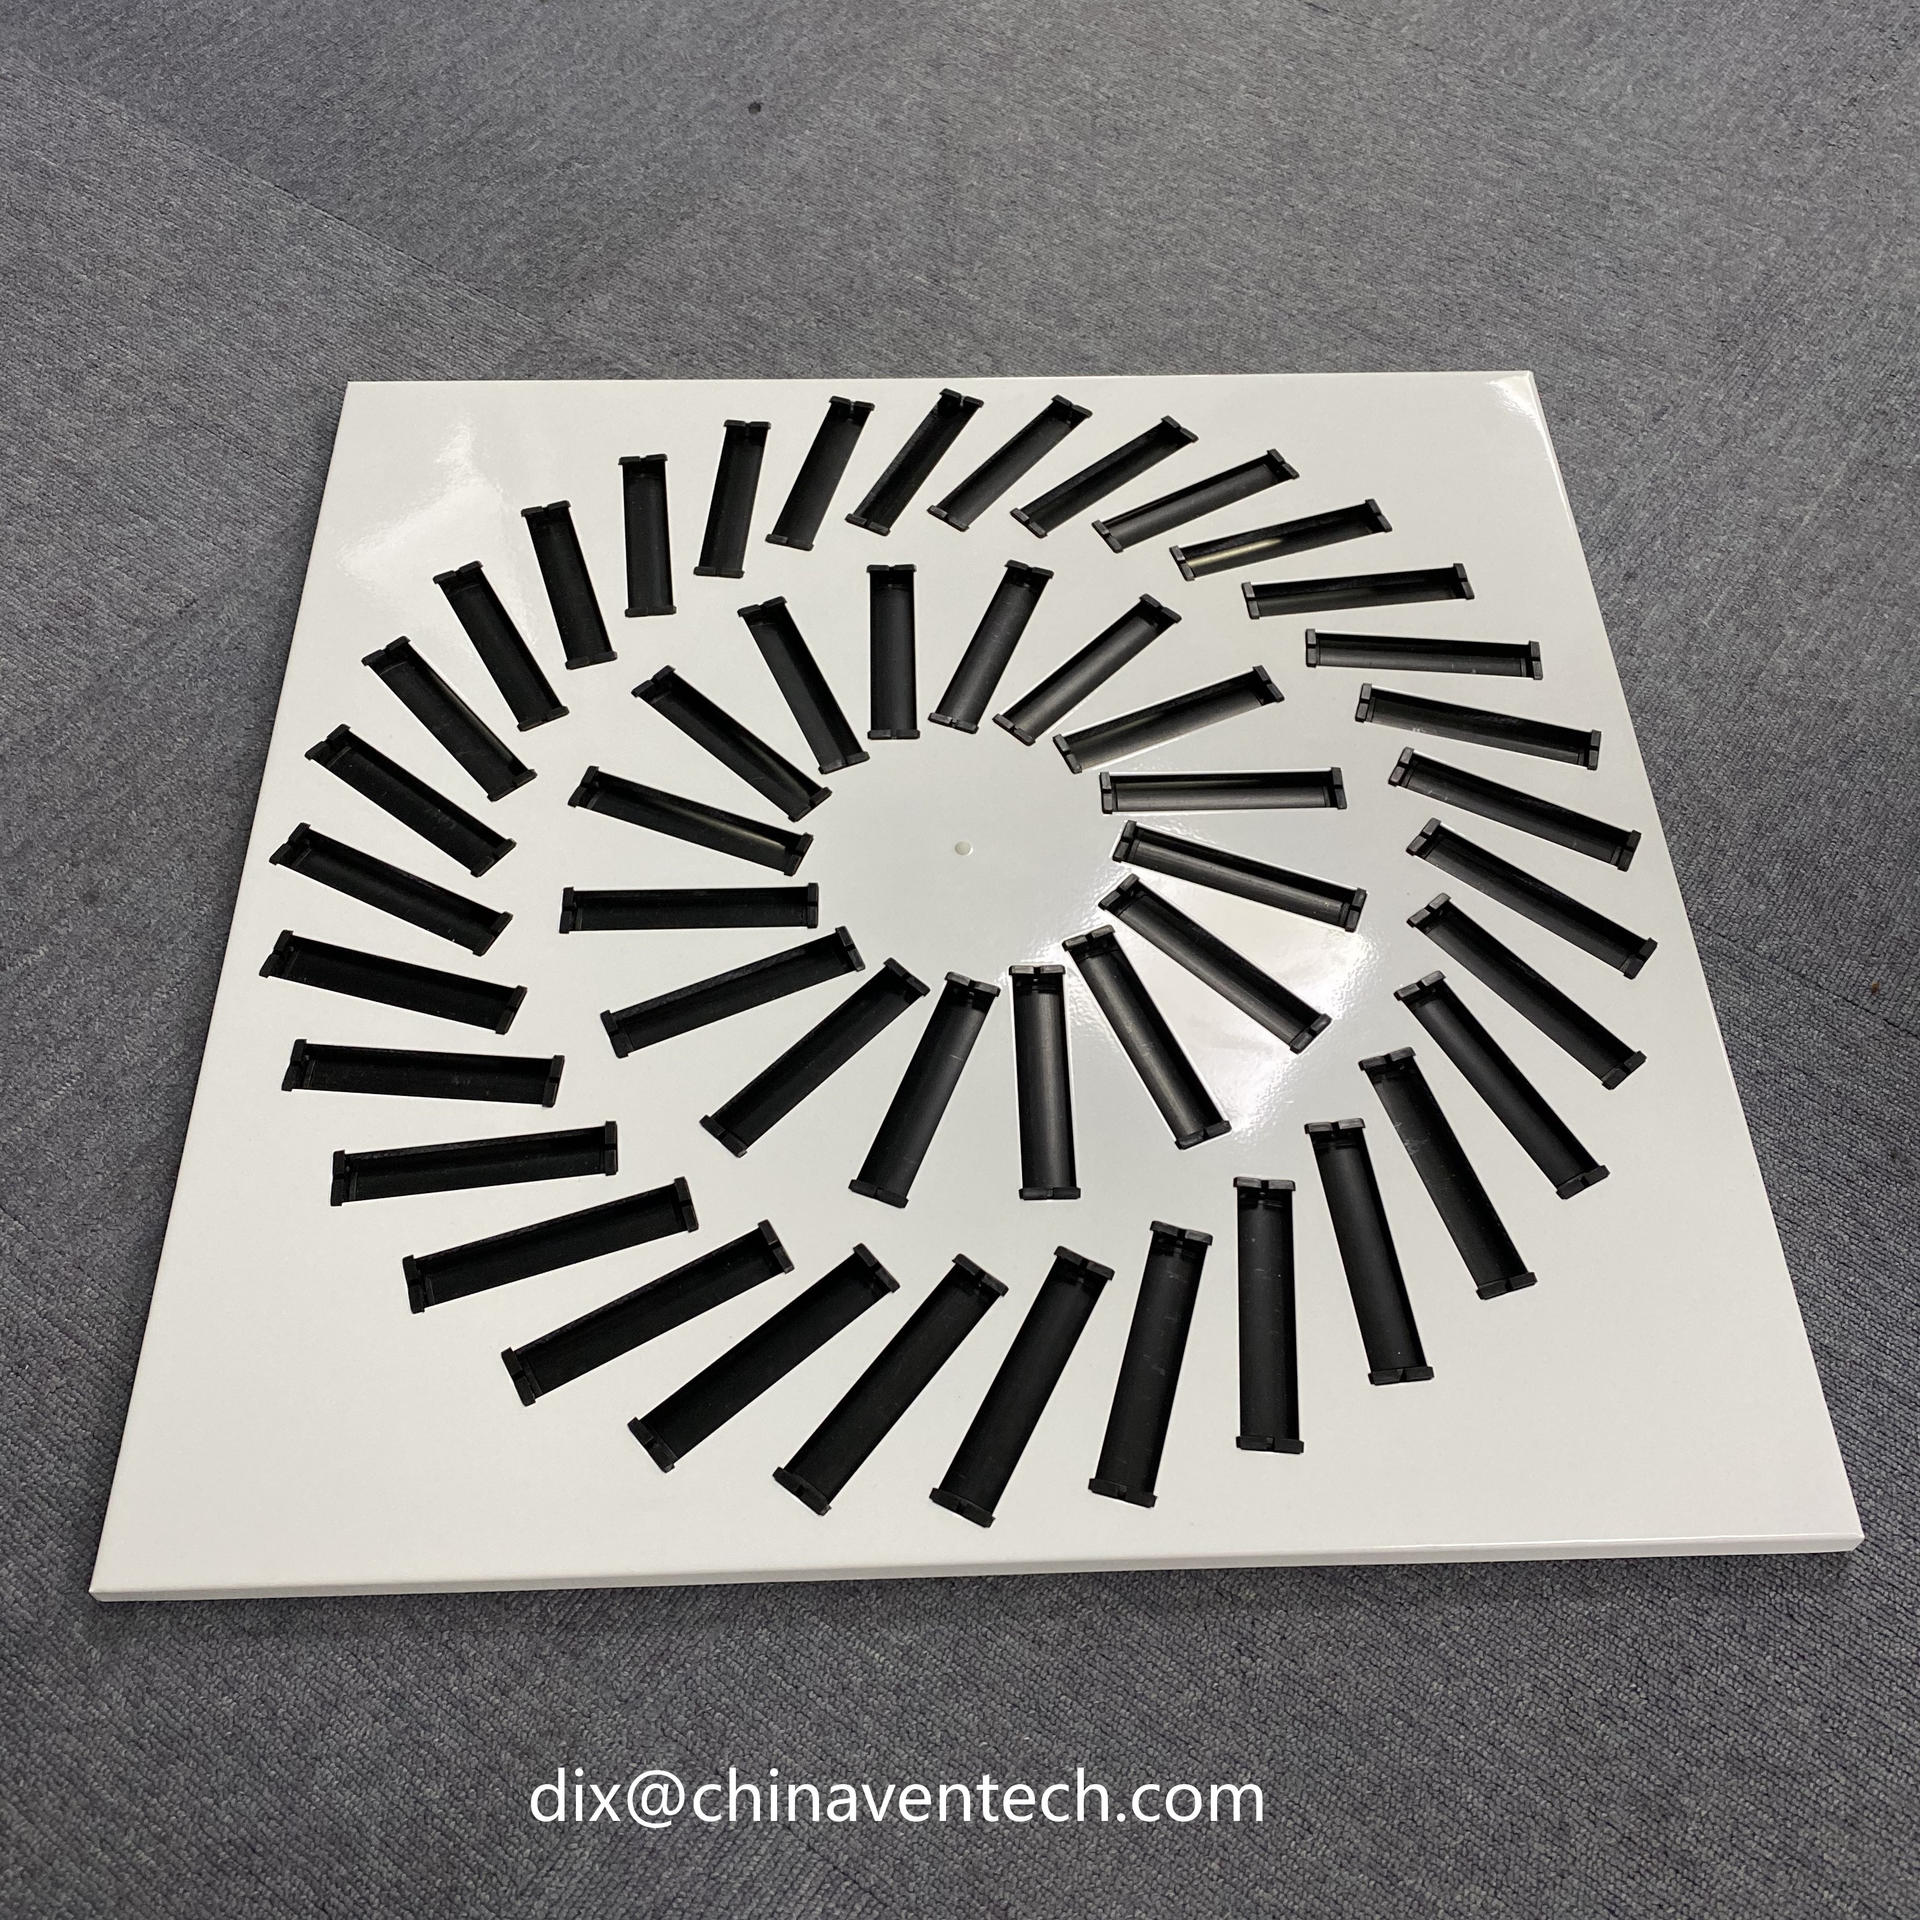 HVAC VENTILATION SYSTEM SQUARE SWIRL DIFFUSER WITH ADJUSTABLE RADIAL AIR PATTERN